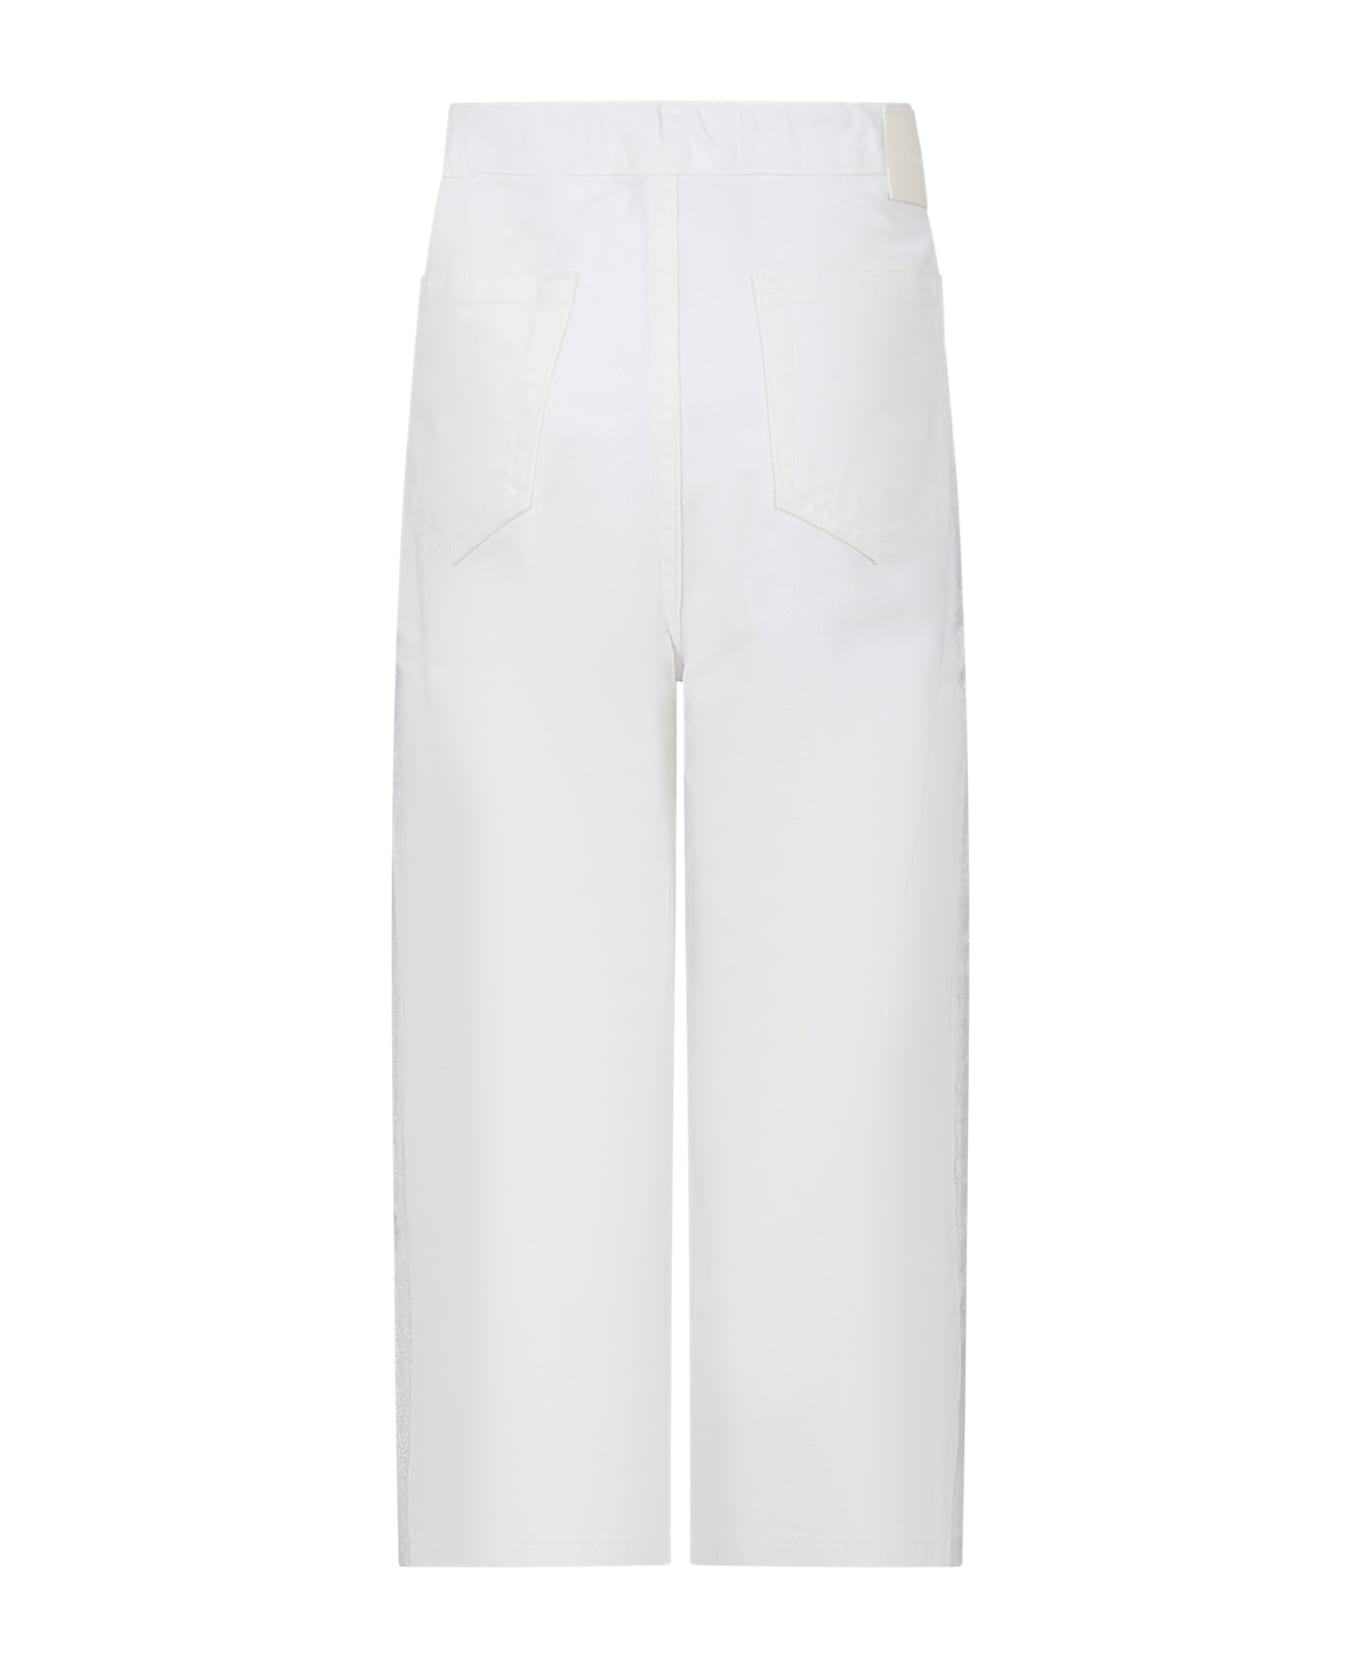 MM6 Maison Margiela Silver Jeans For Girl With Logo - Silver ボトムス